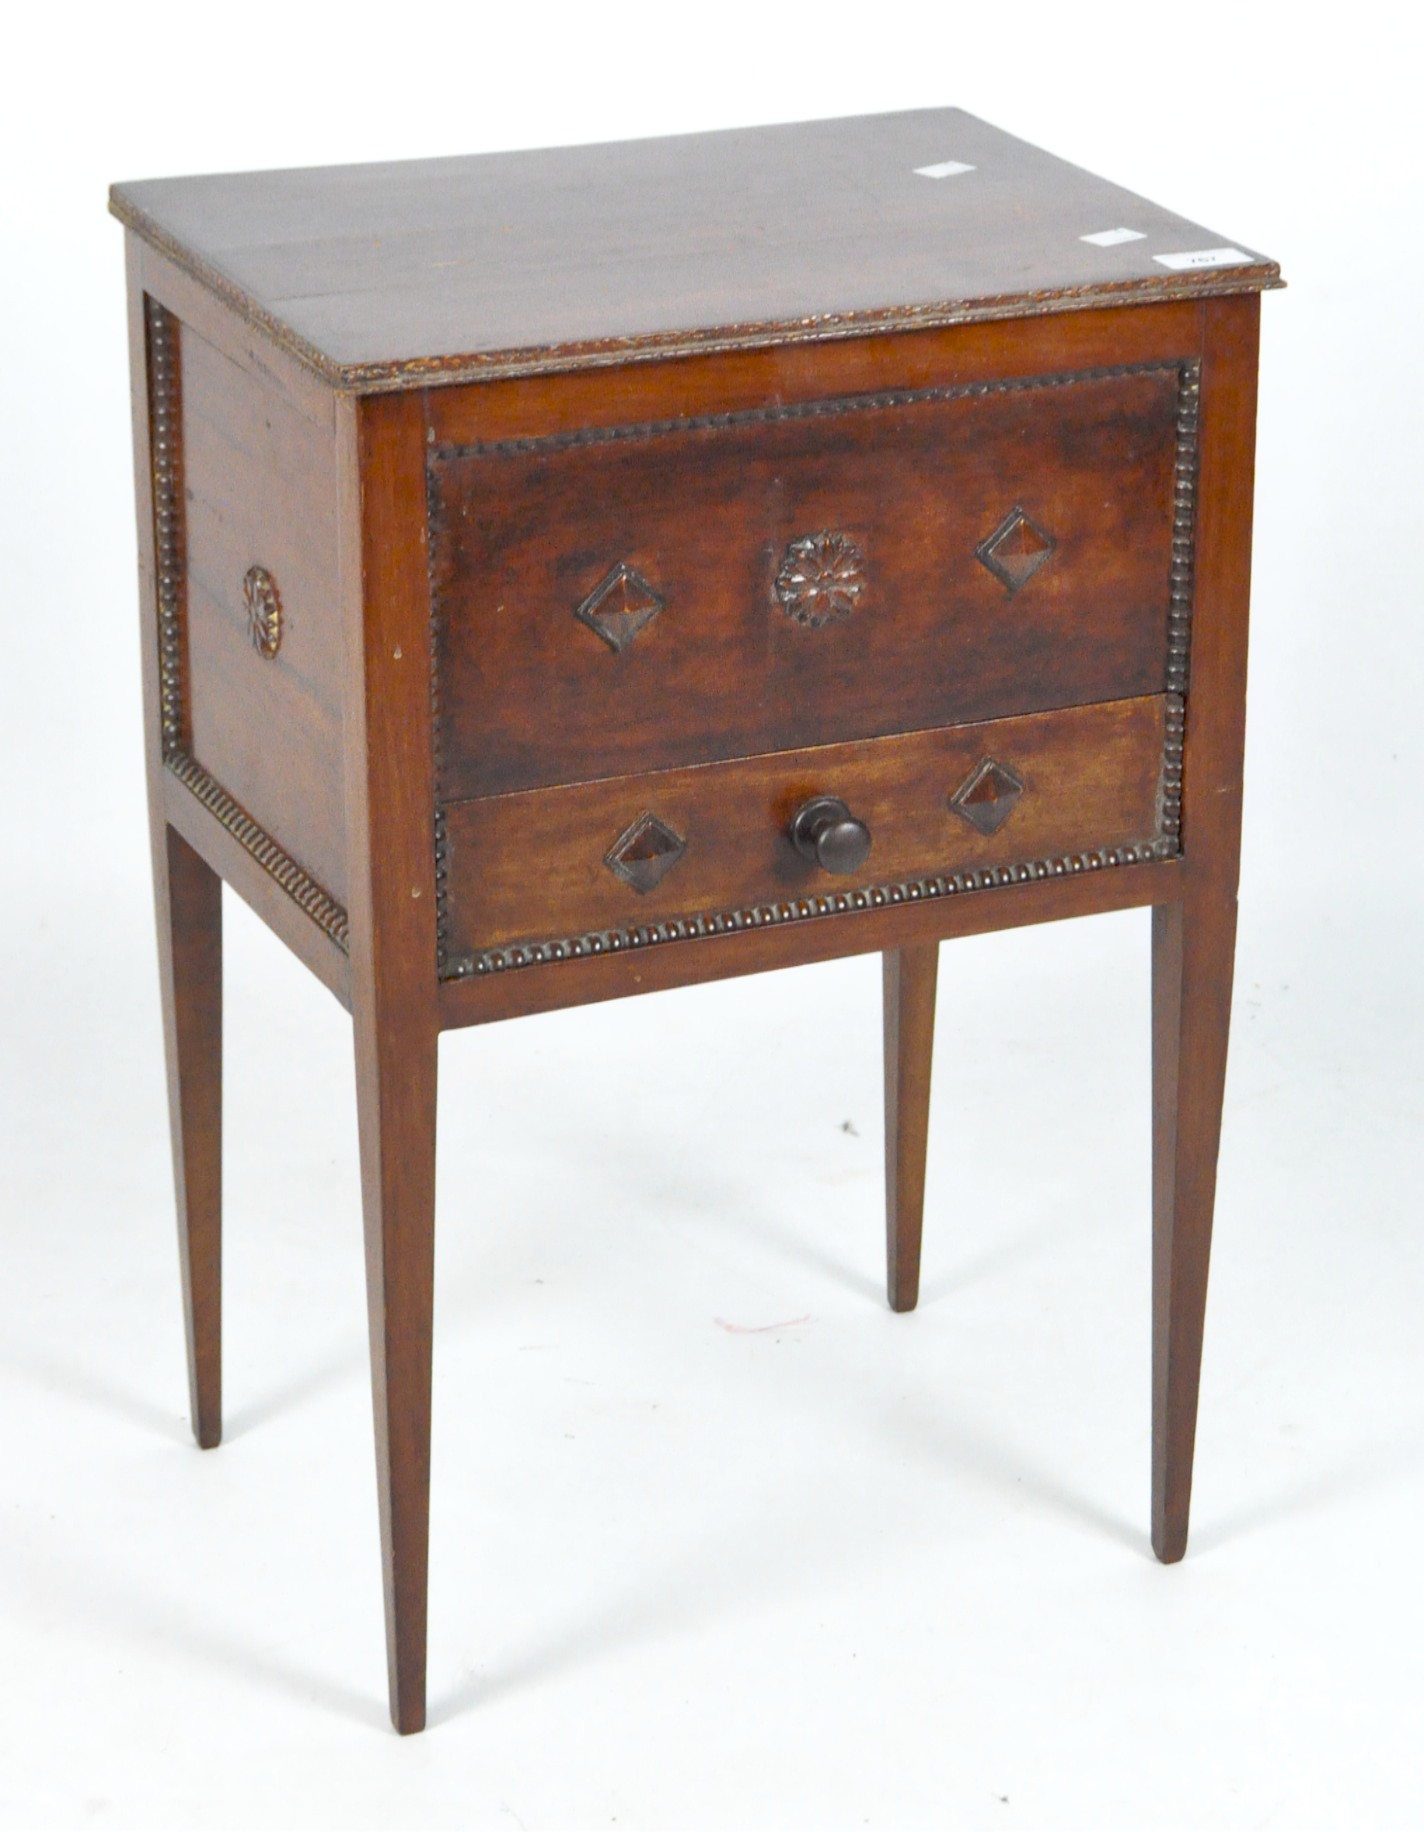 An early 20th century mahogany sewing box on stand,